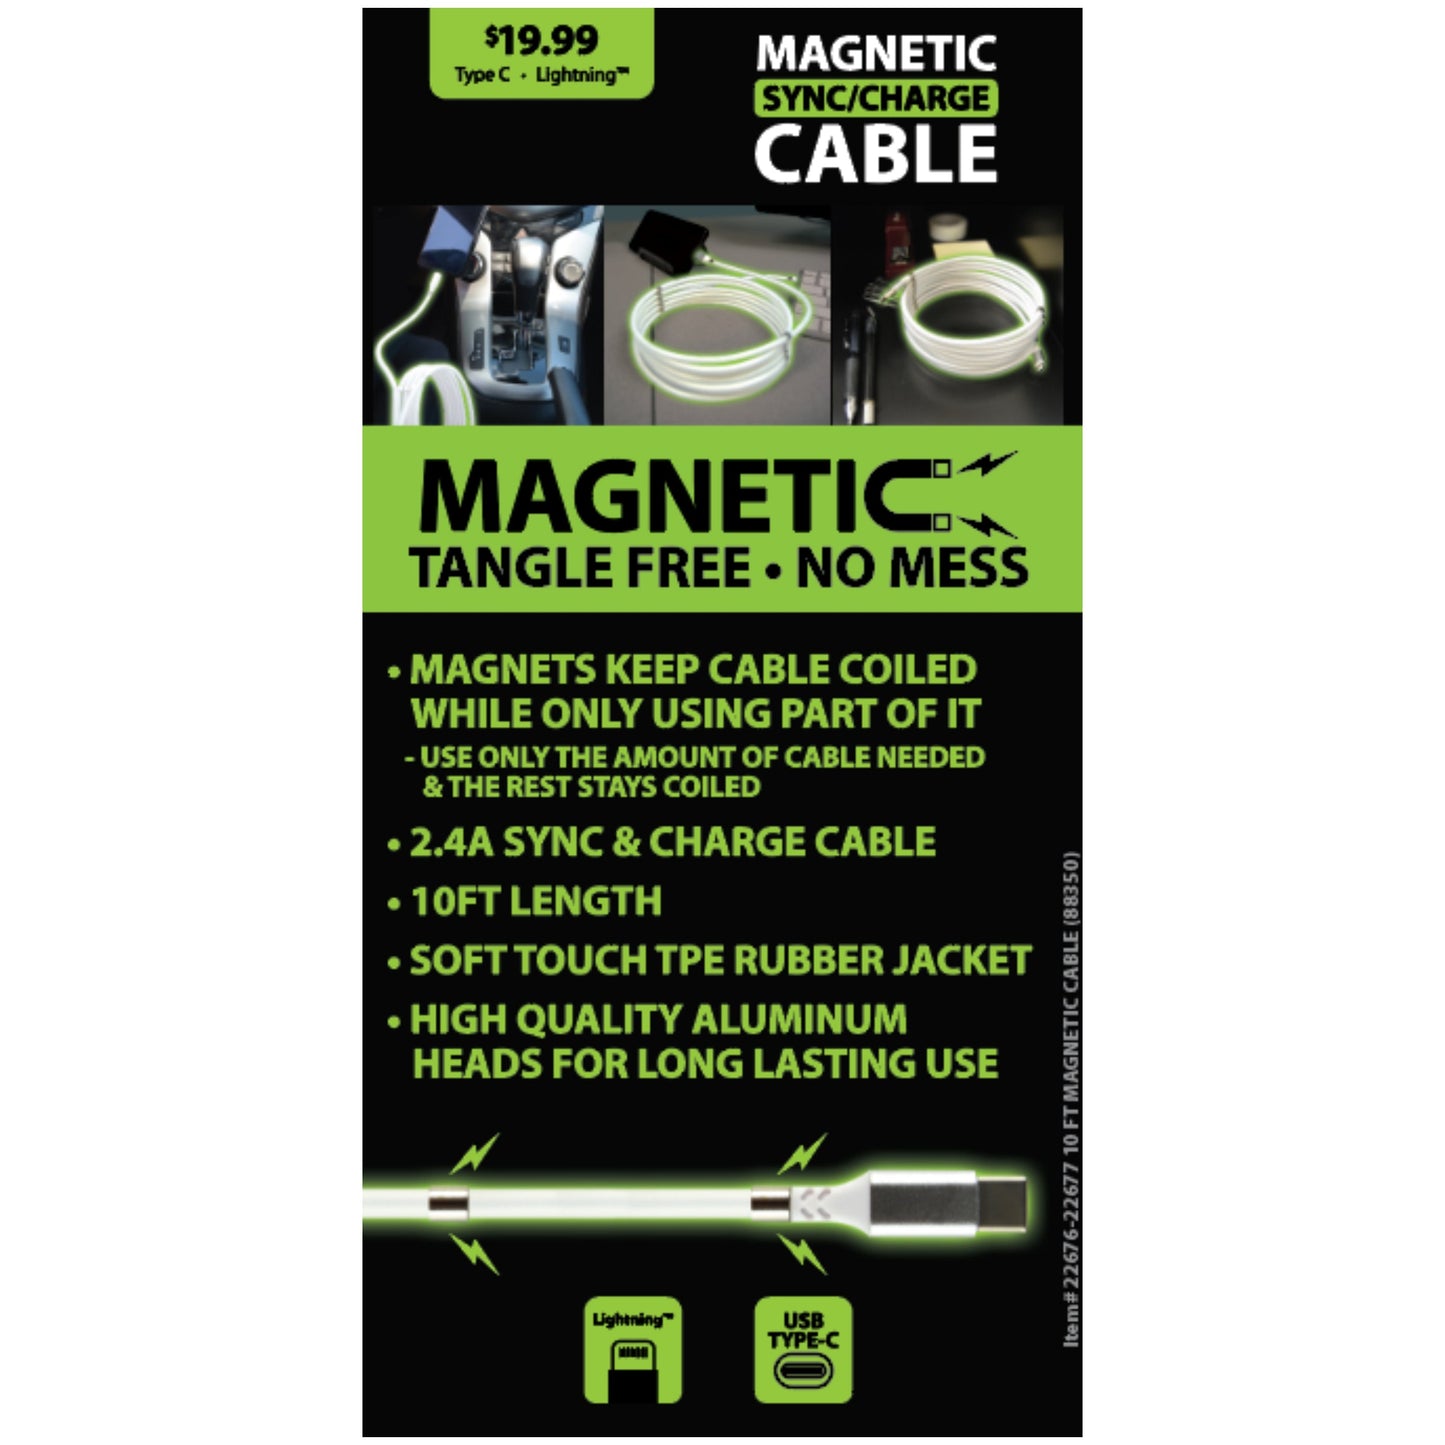 ITEM NUMBER 088350 10FT MAGNETIC CABLES 6 PIECES PER DISPLAY